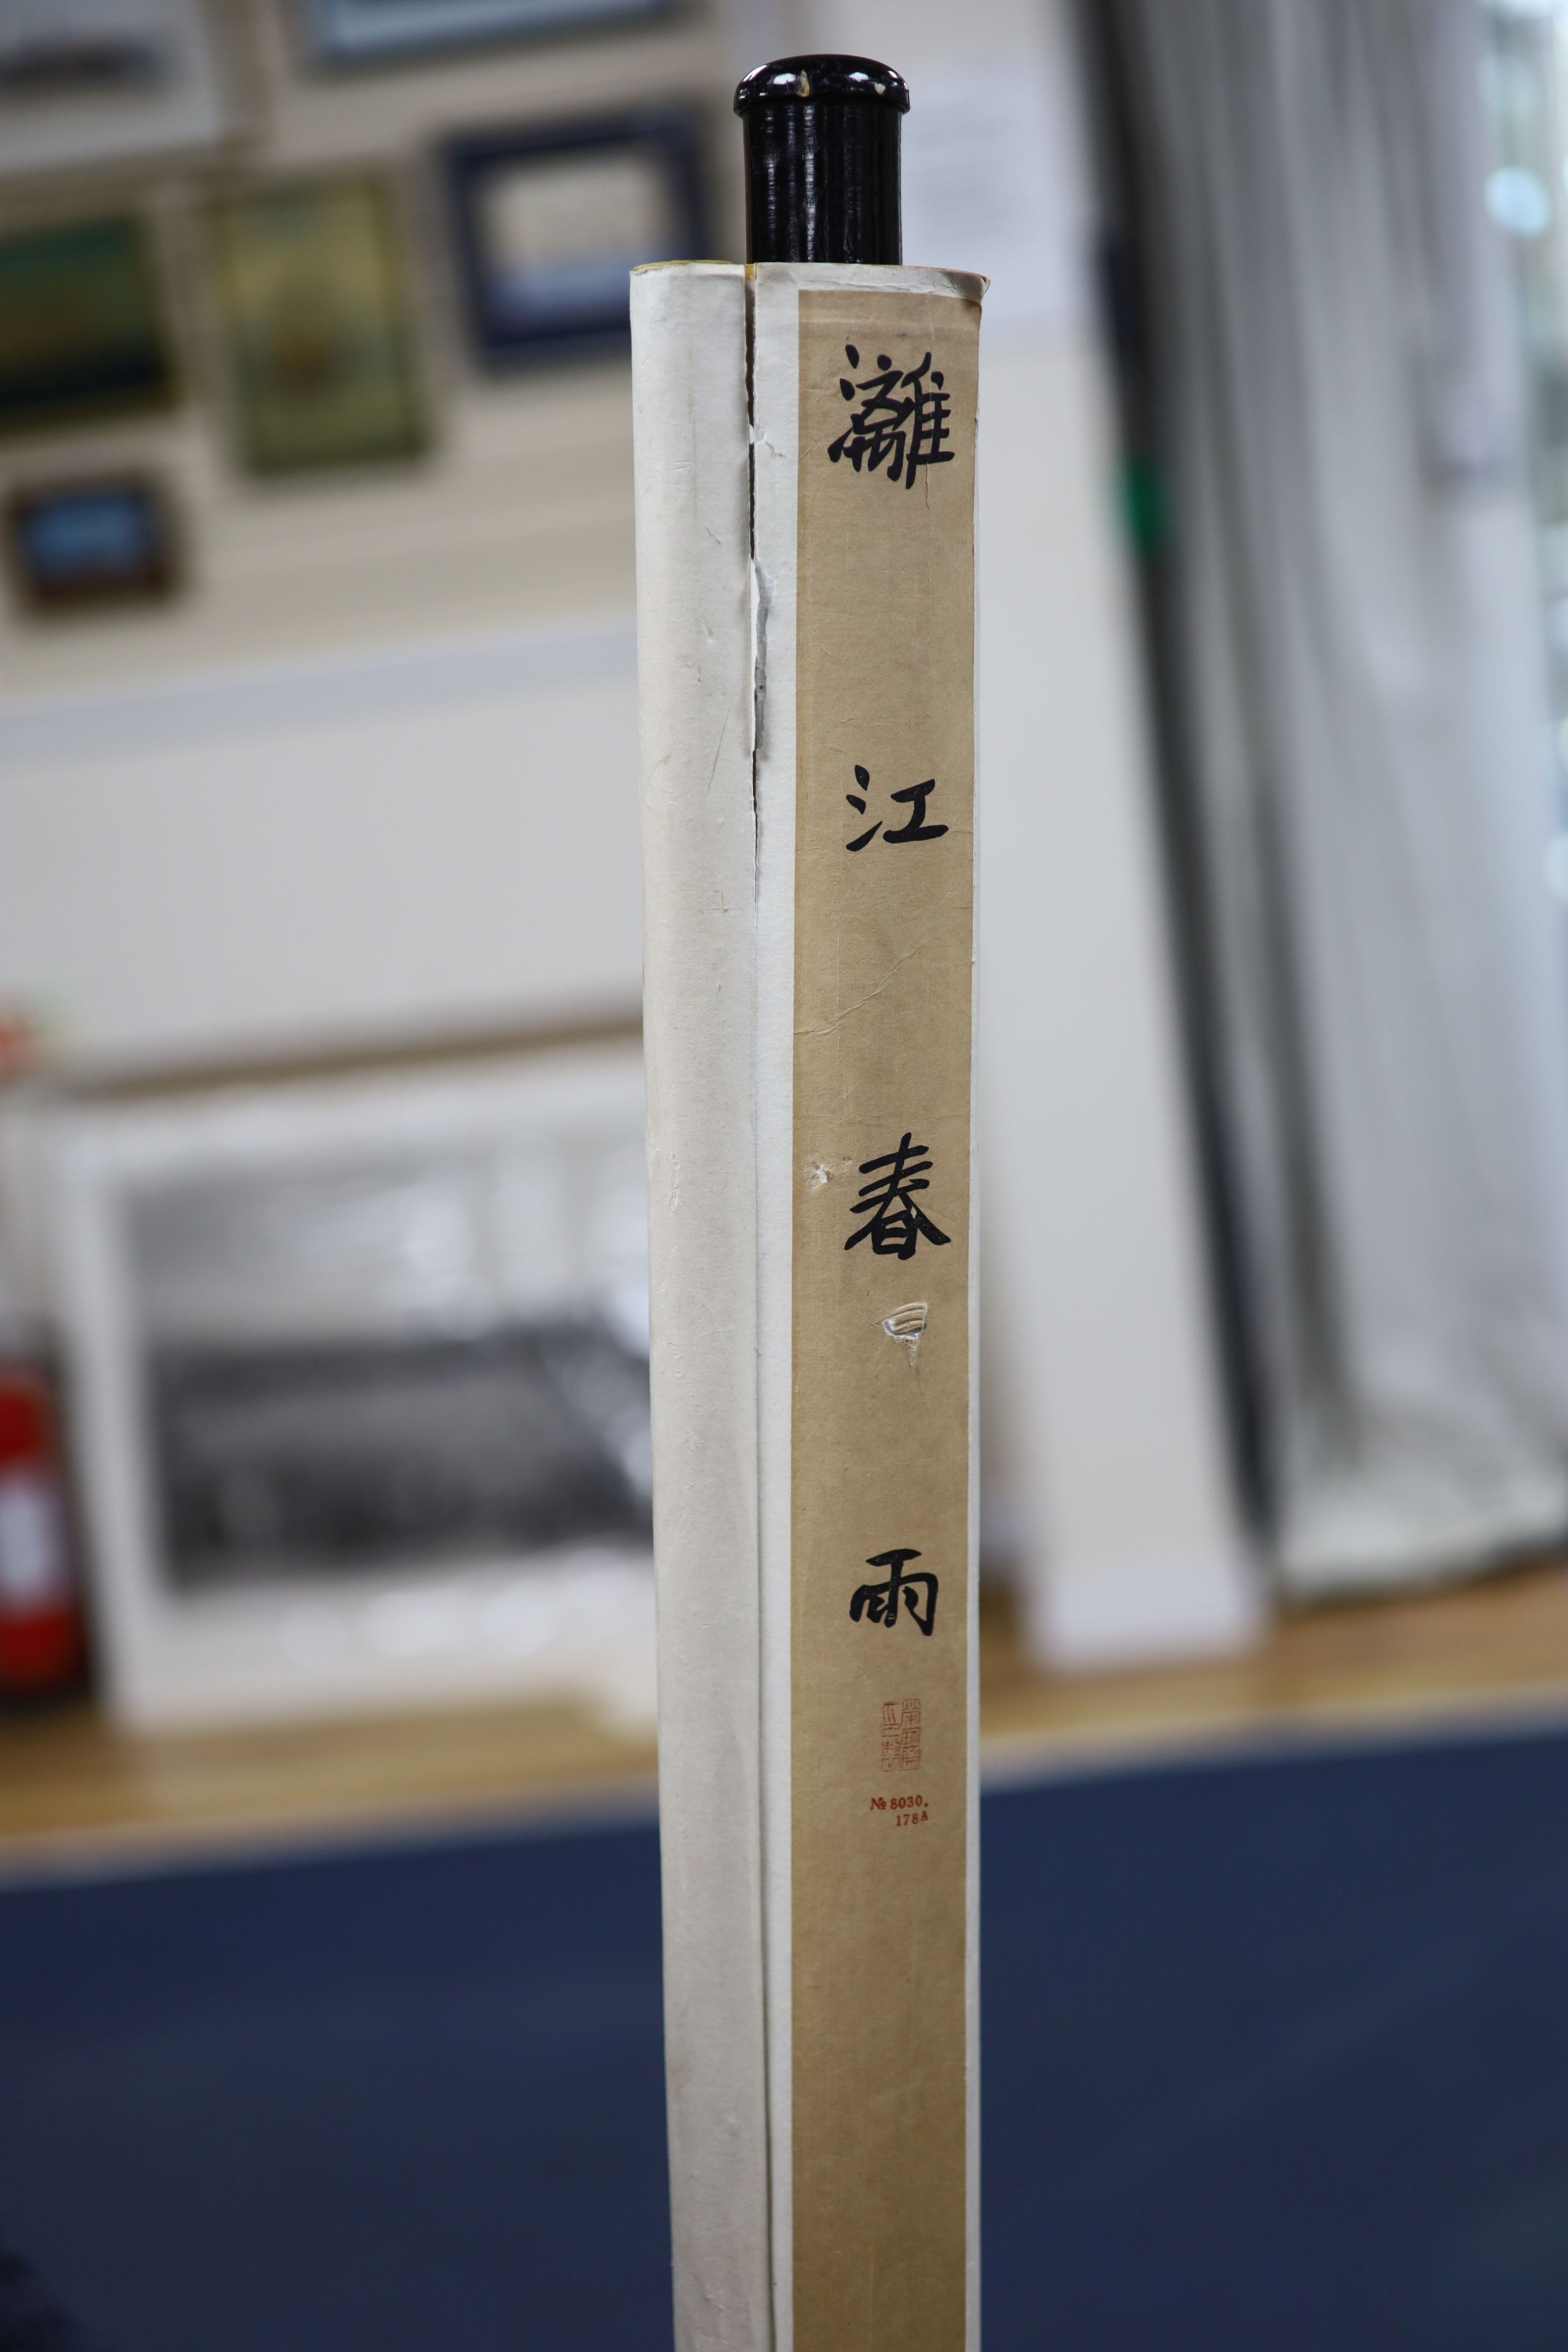 A Chinese printed scroll hanging